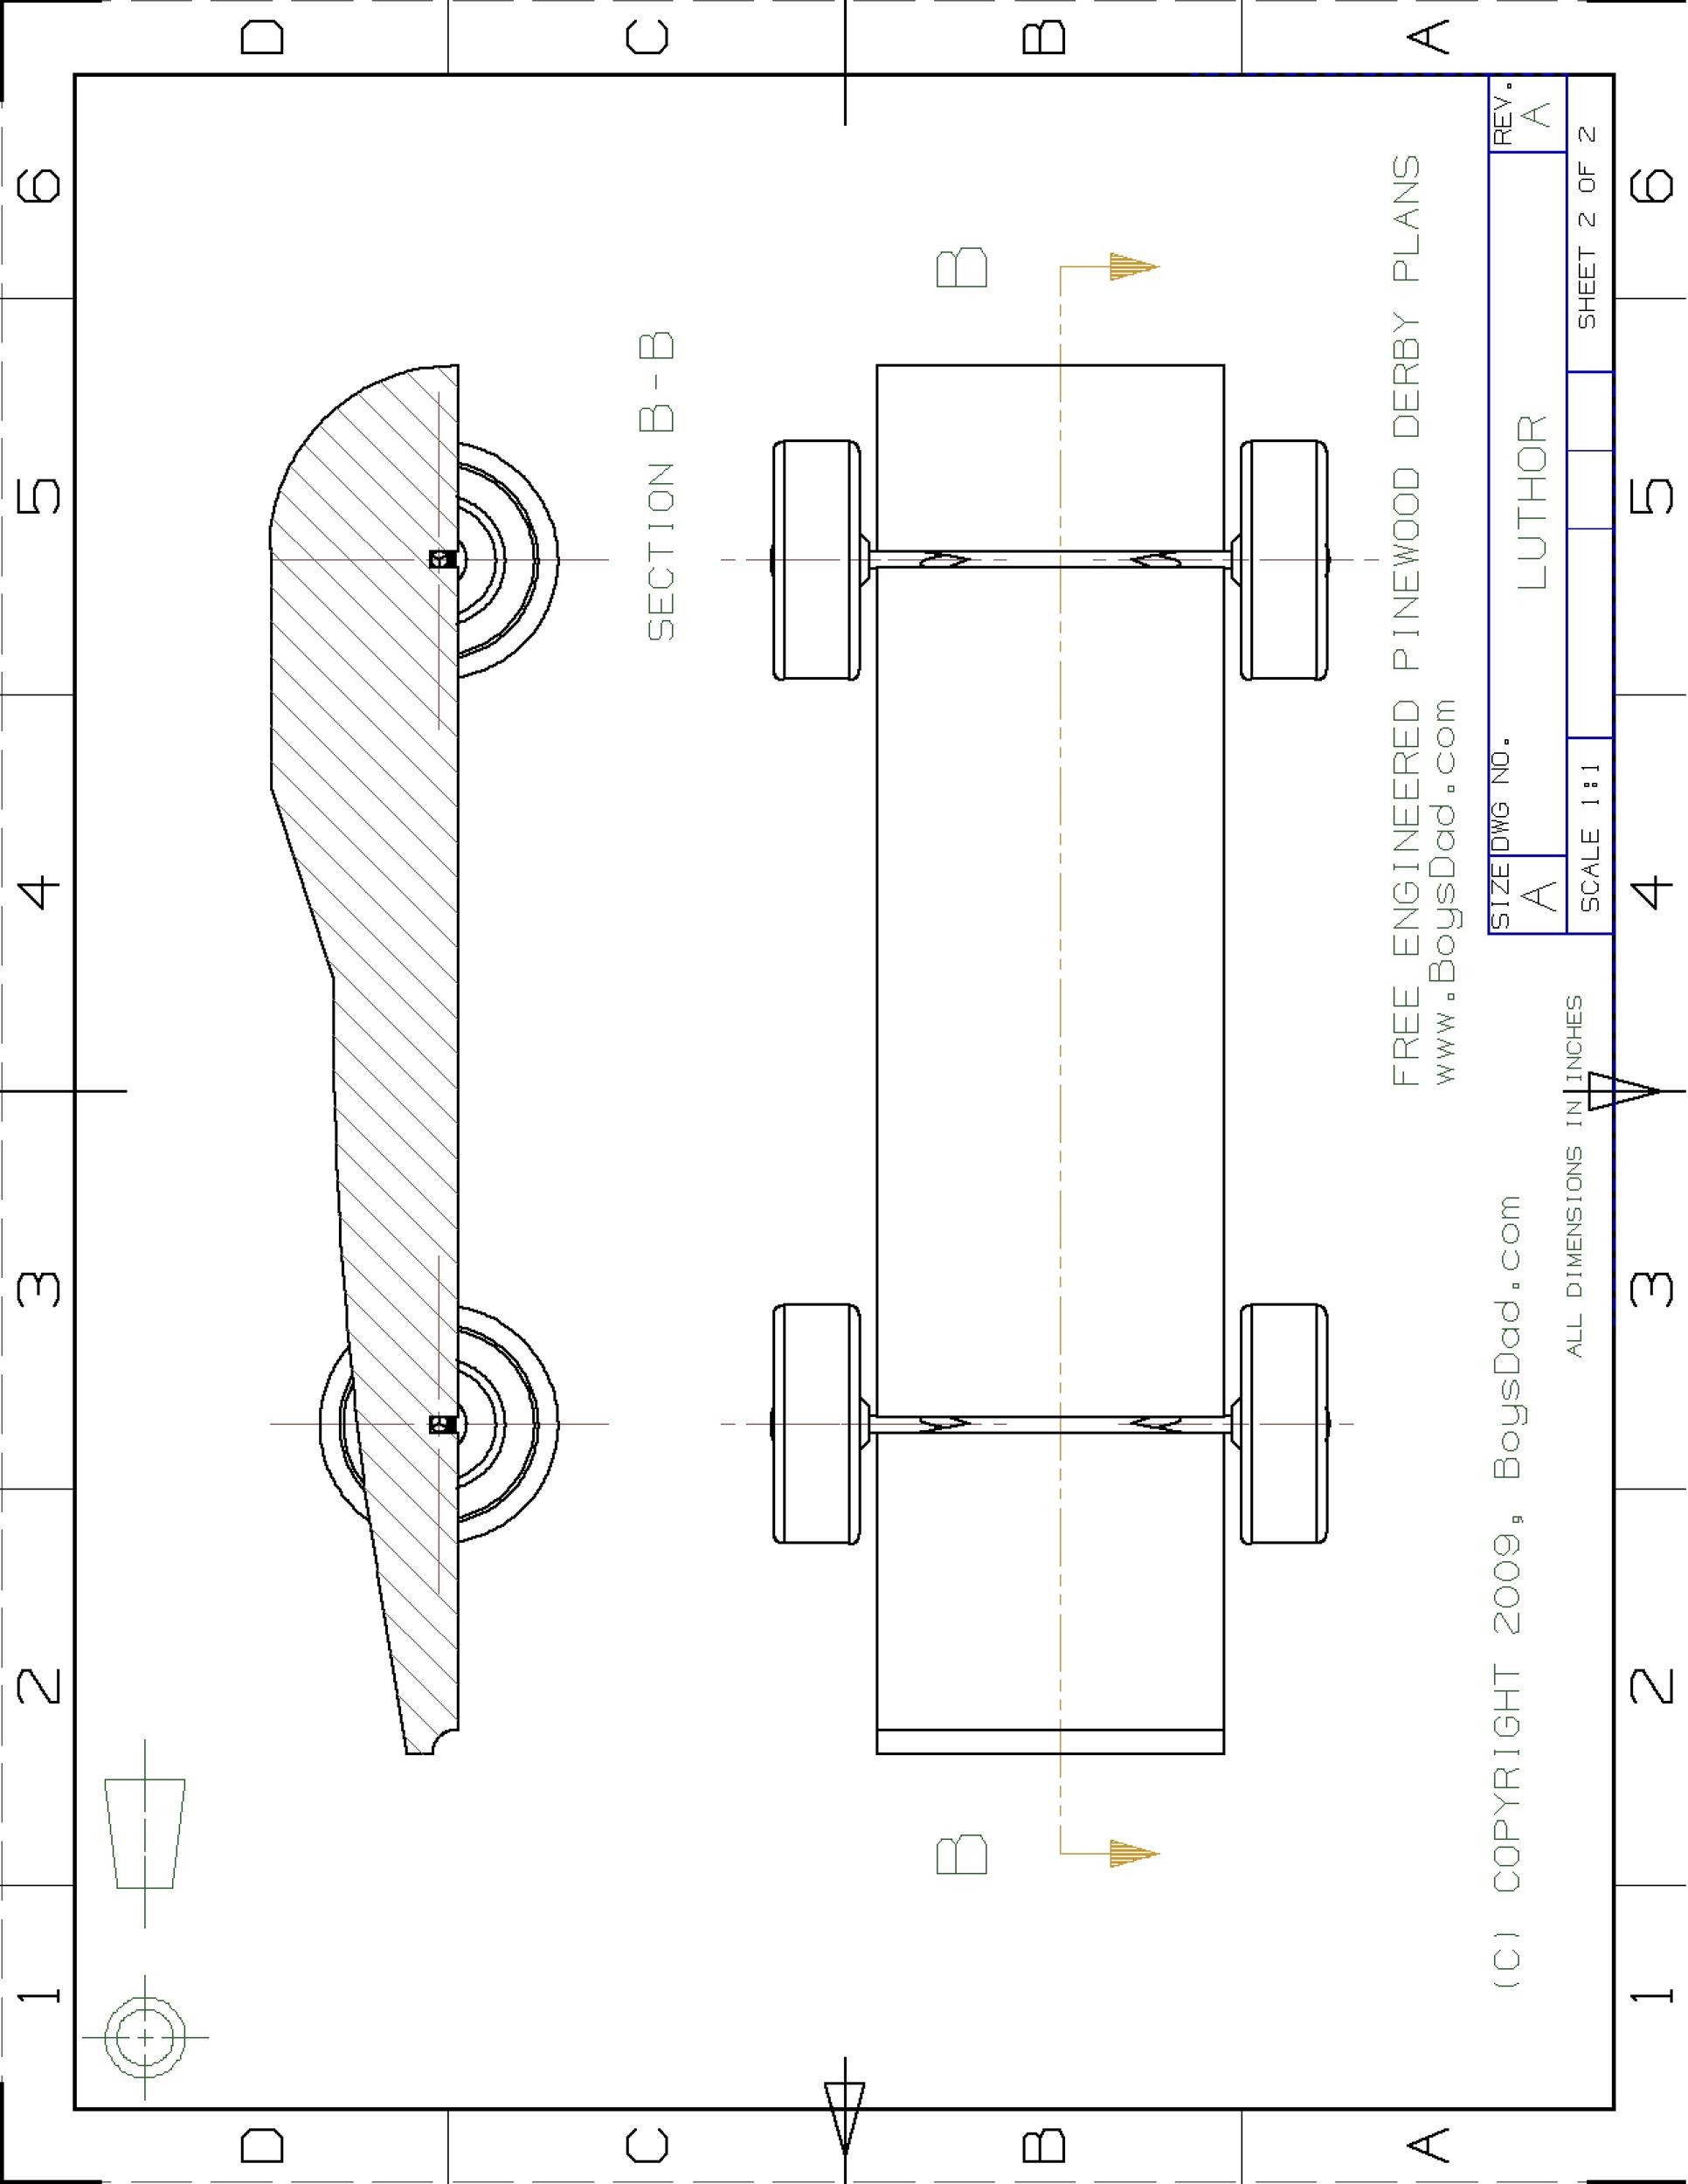 39-awesome-pinewood-derby-car-designs-templates-templatelab-image